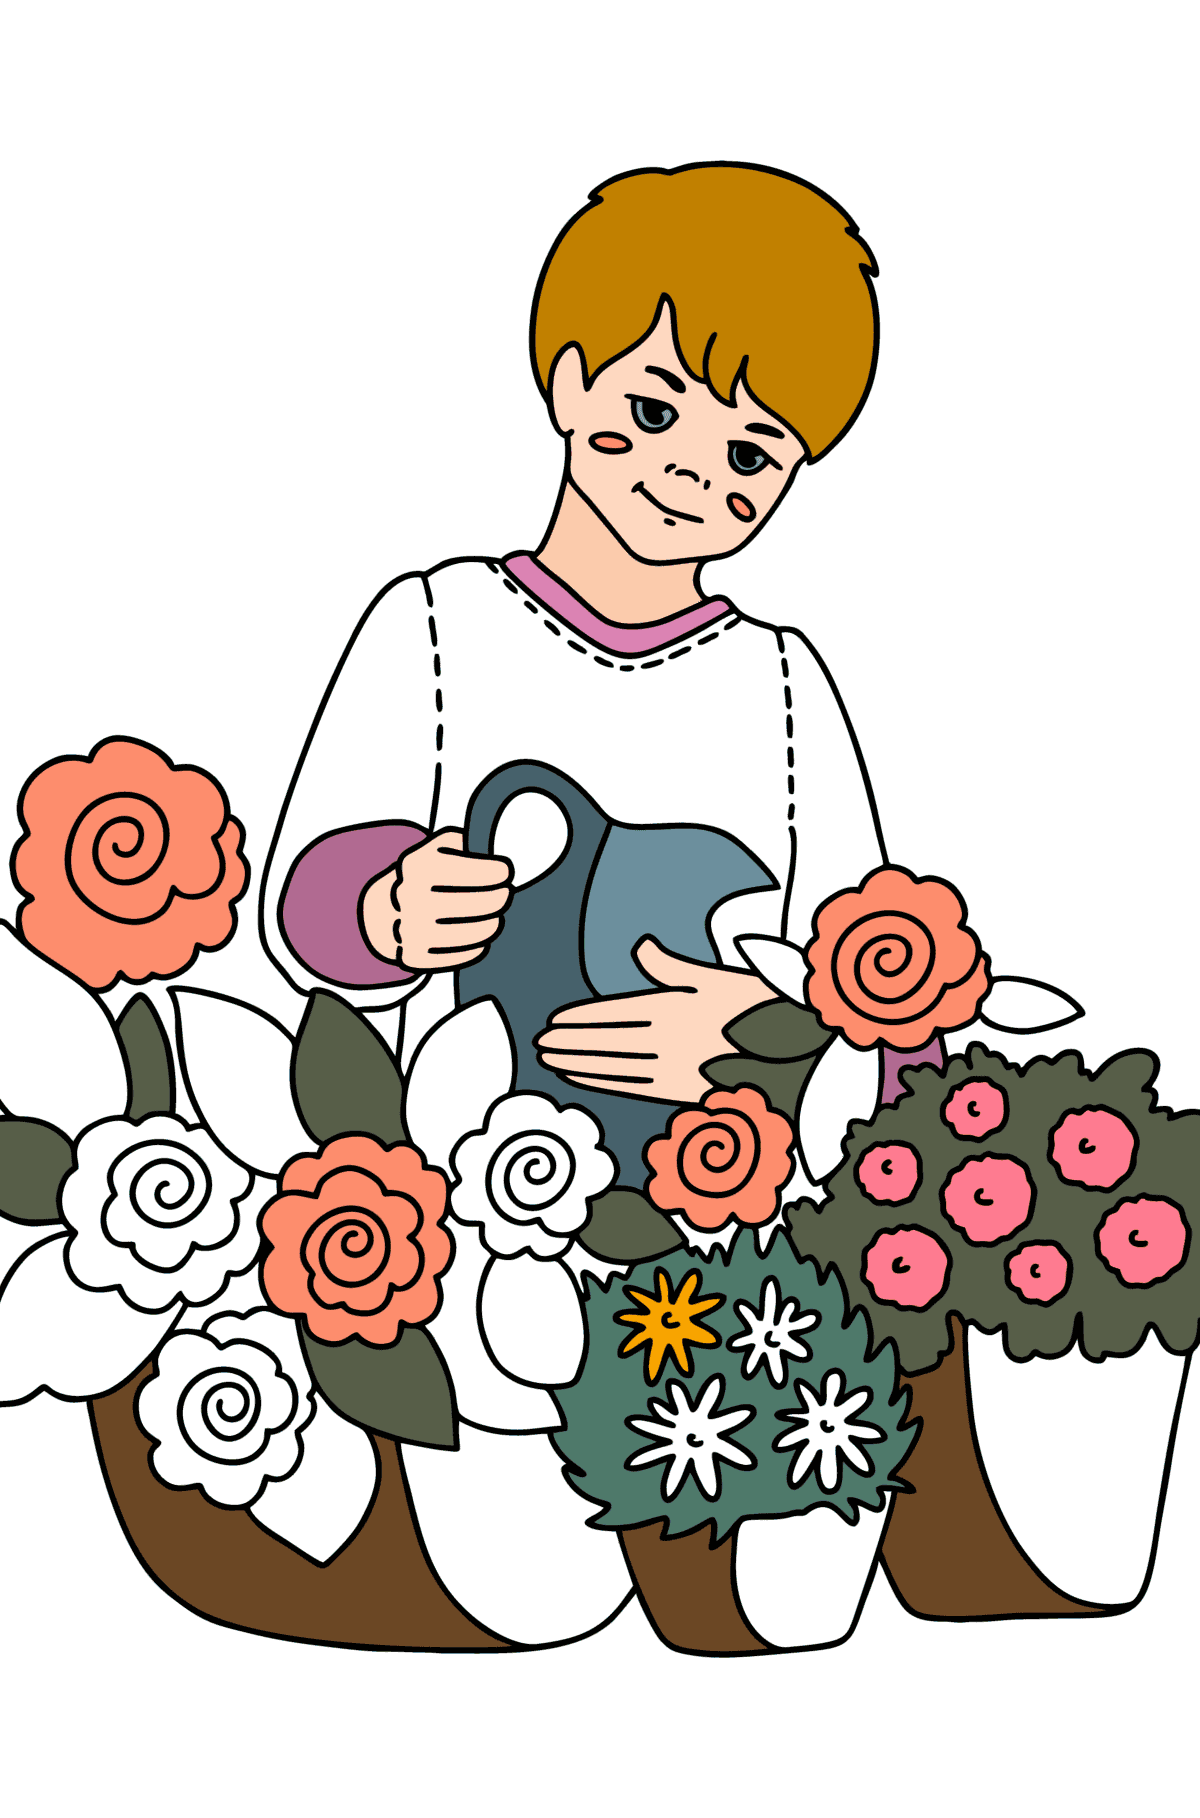 Boy watering flowers сoloring page - Coloring Pages for Kids